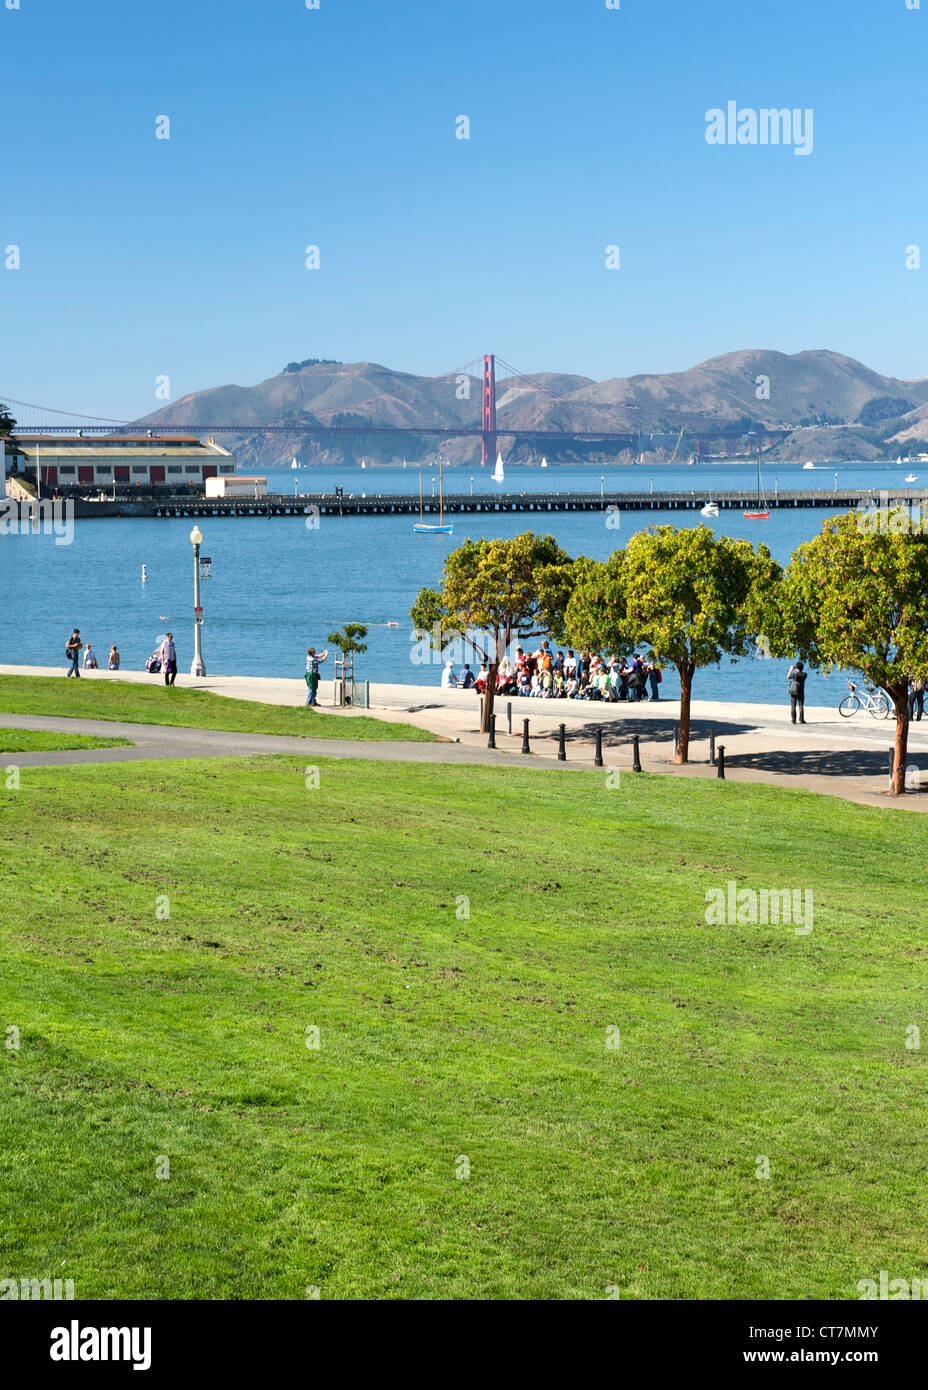 Aquatic Park, part of the San Francisco Maritime National Historical Park on the waterfront in San Francisco, California, USA. Stock Photo